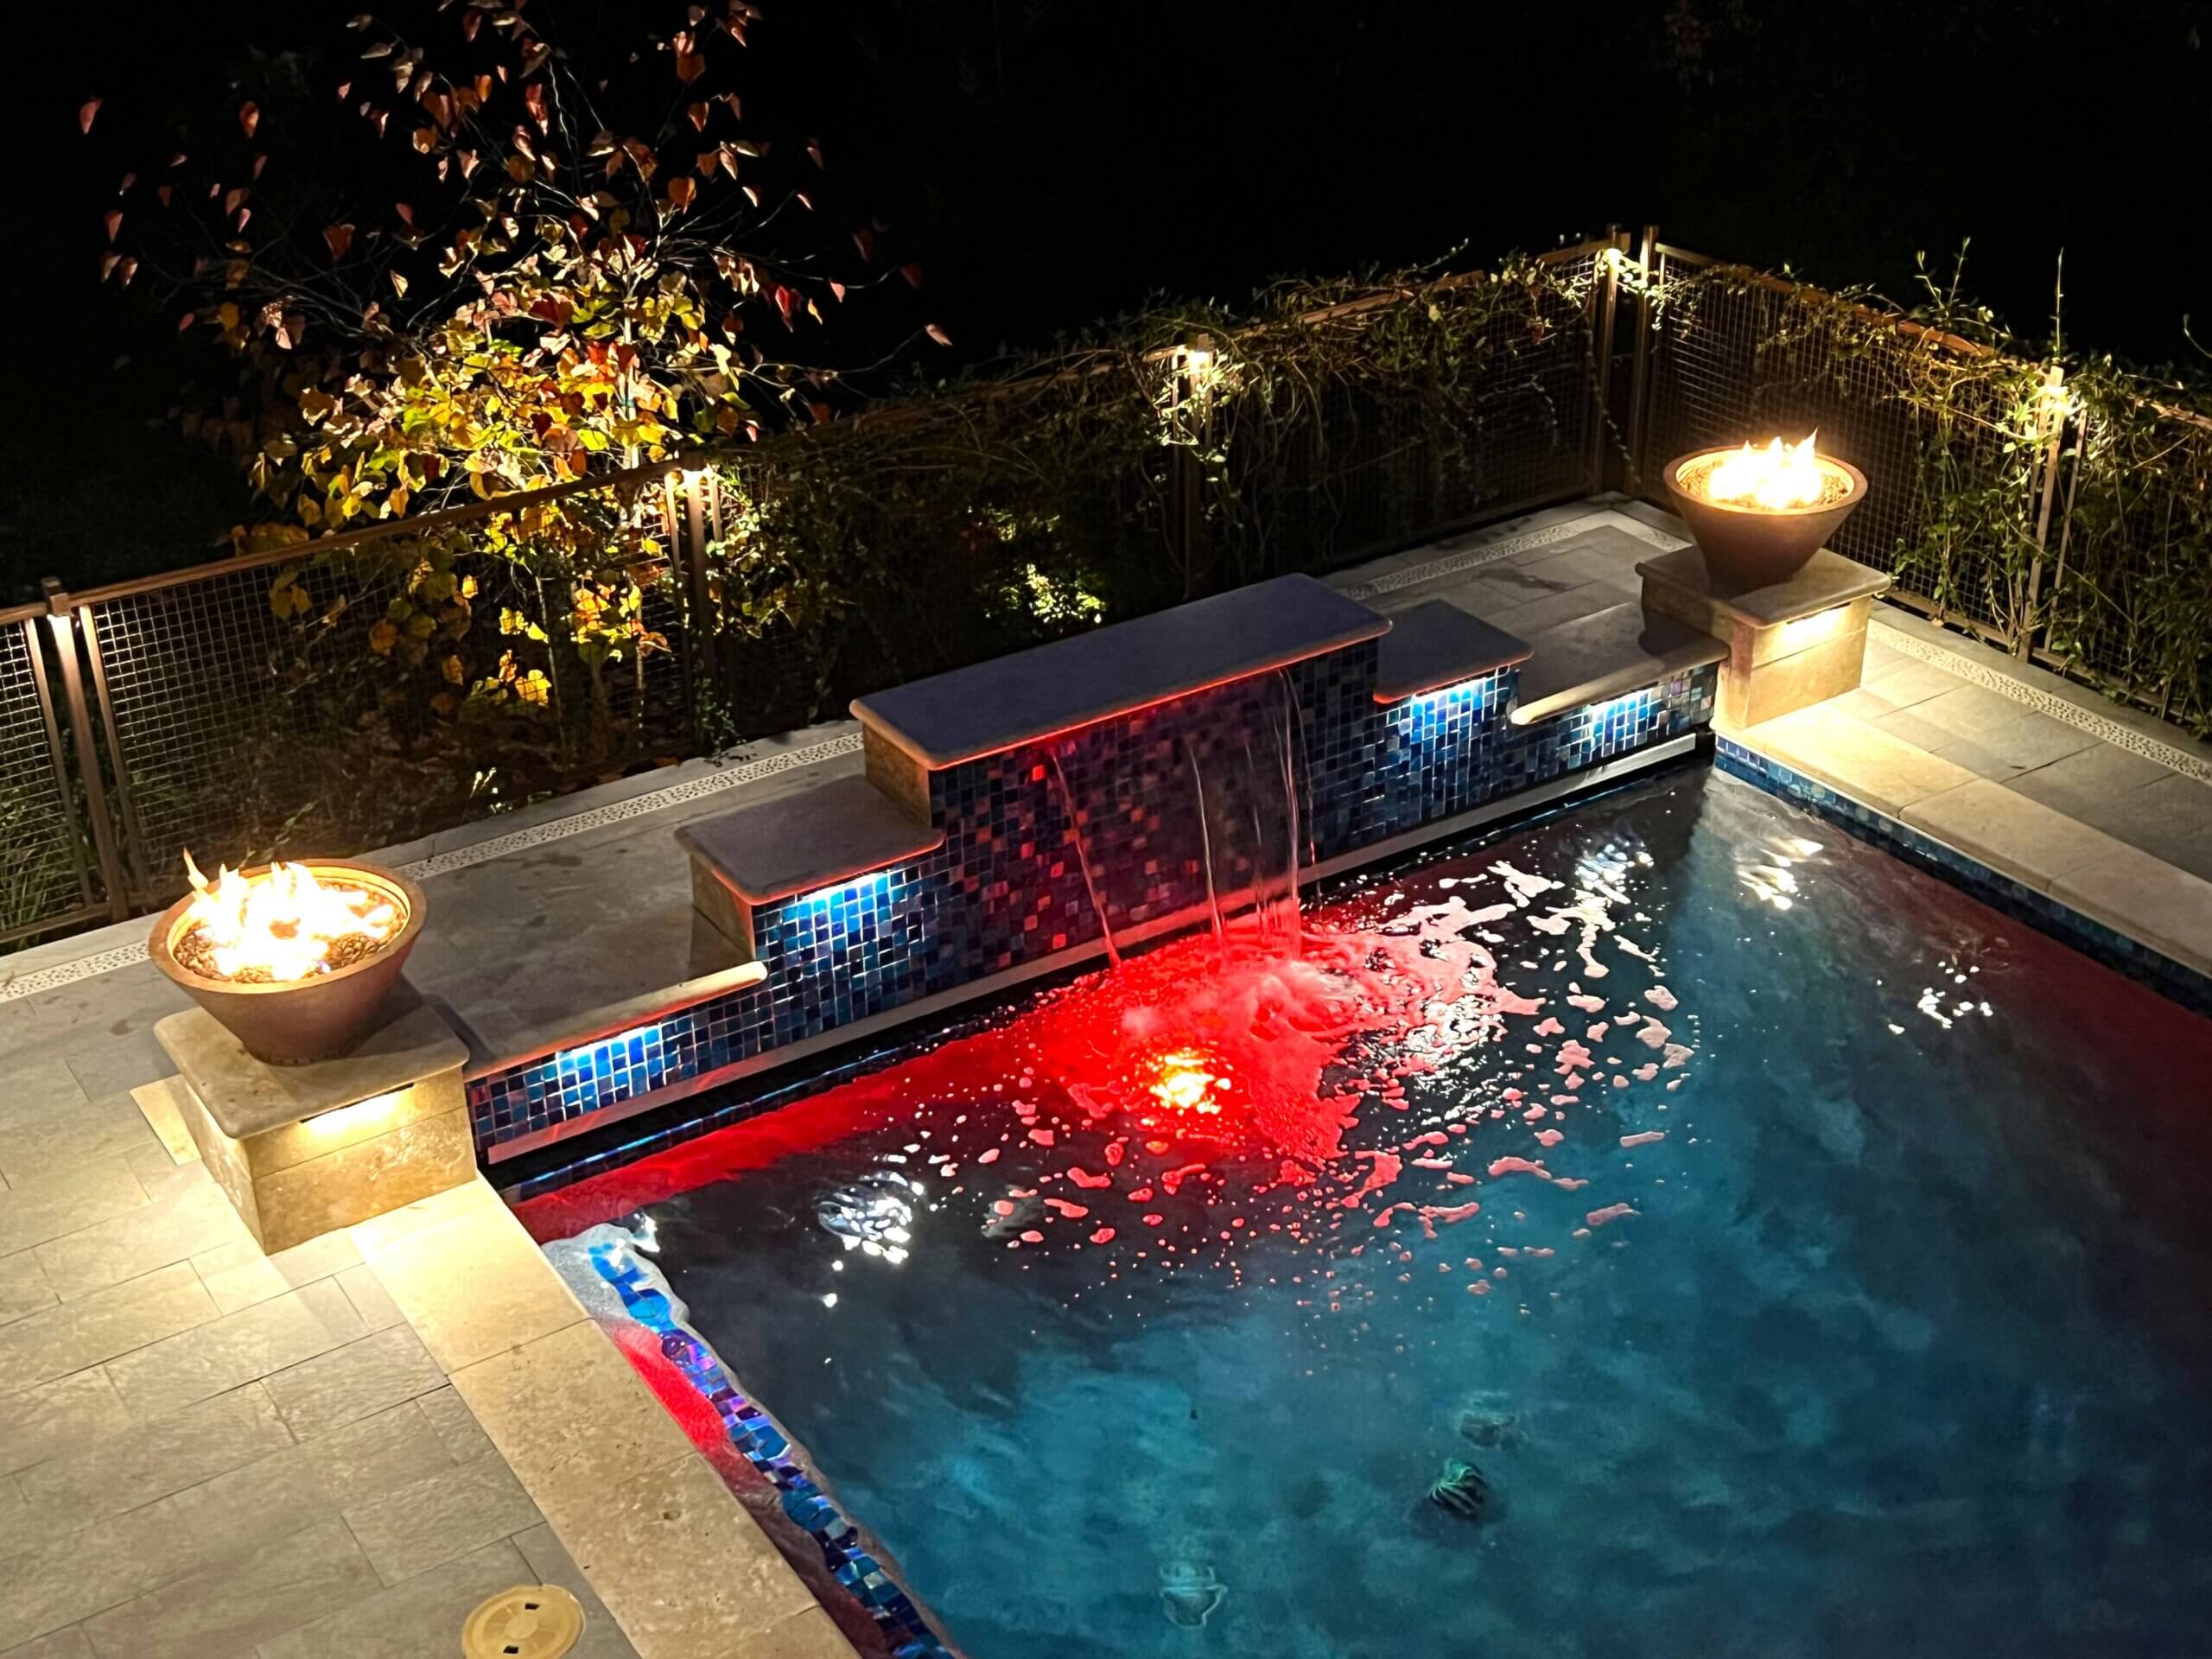 Swimming pool at night with red lights under waterfall feature in Santa Cruz hillside backyard